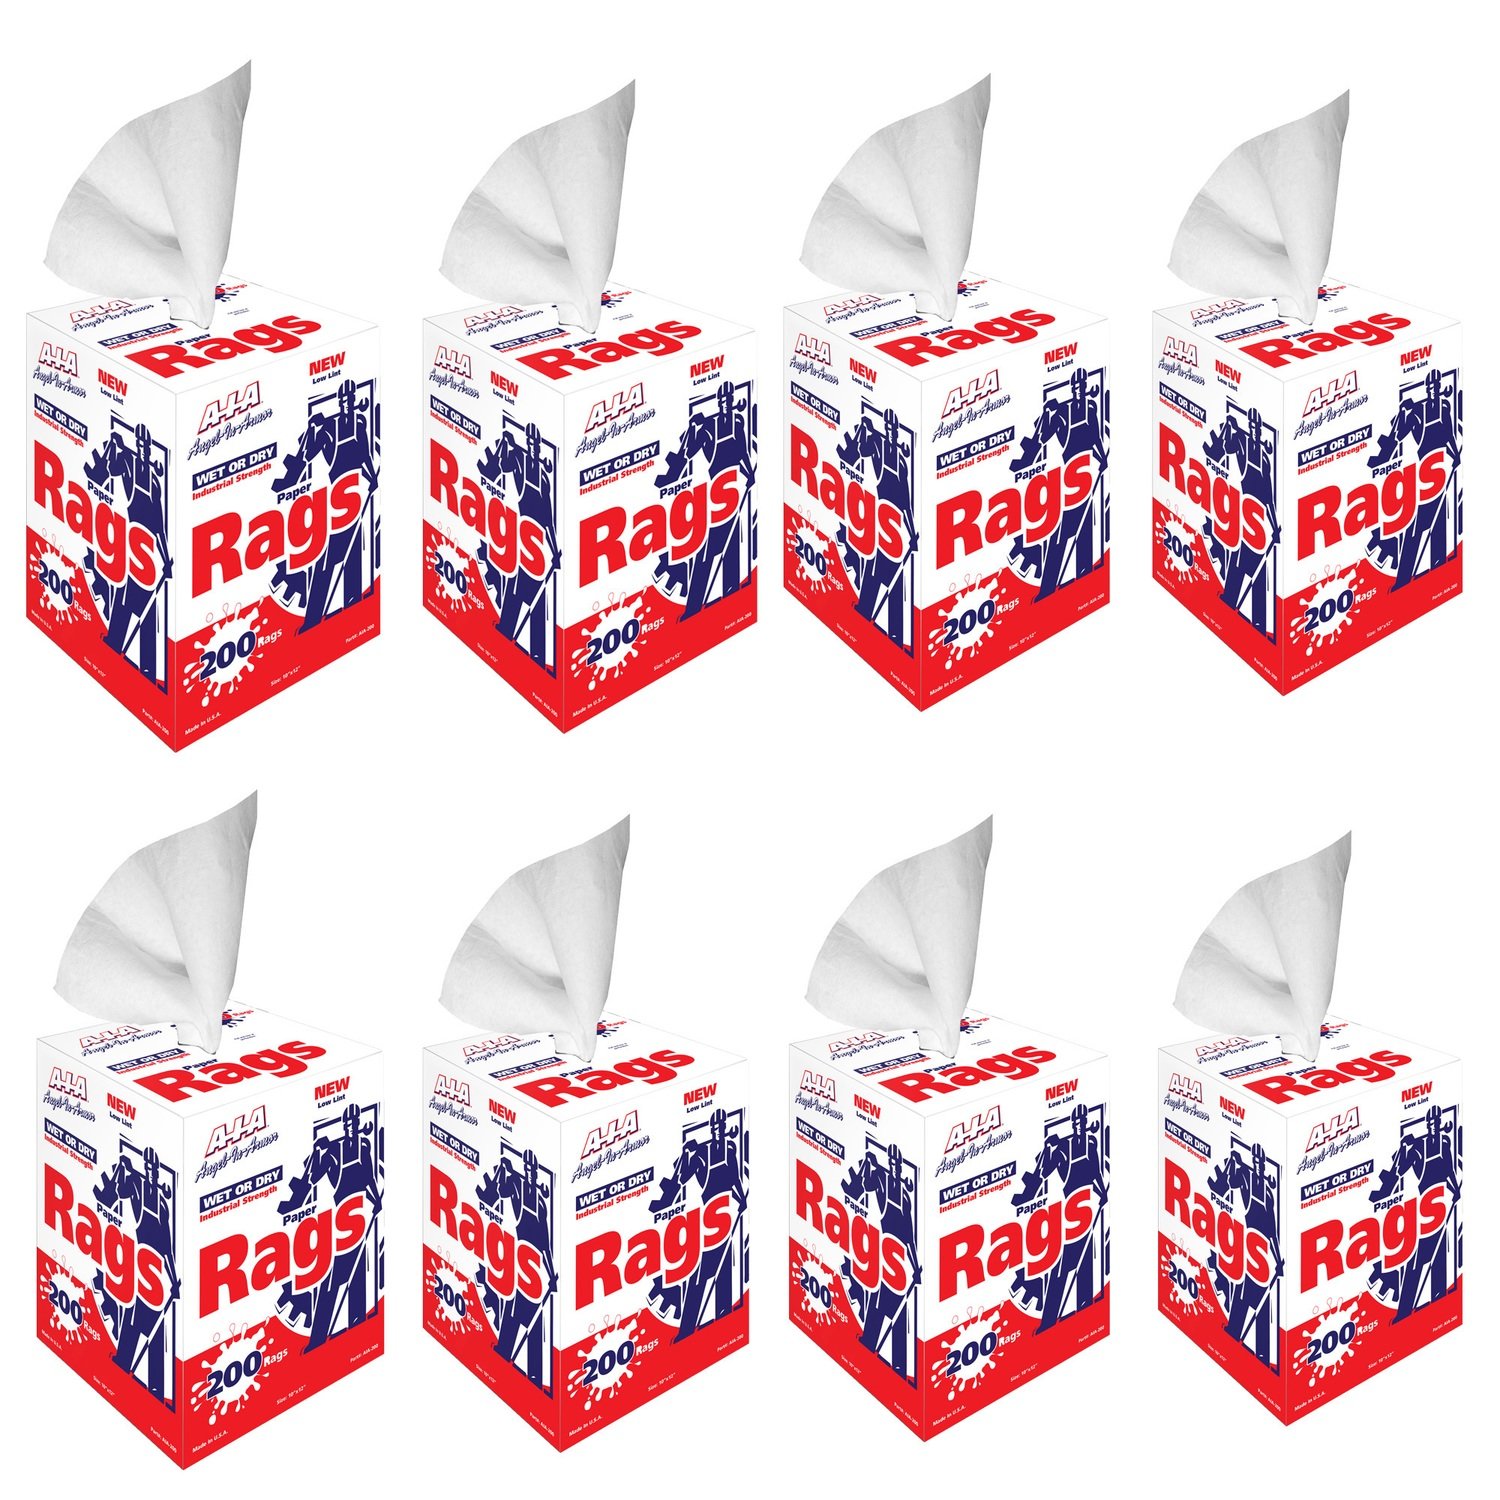 Paper Rags (White) in a Centerpull Box - 200 Count-Contractor Pack